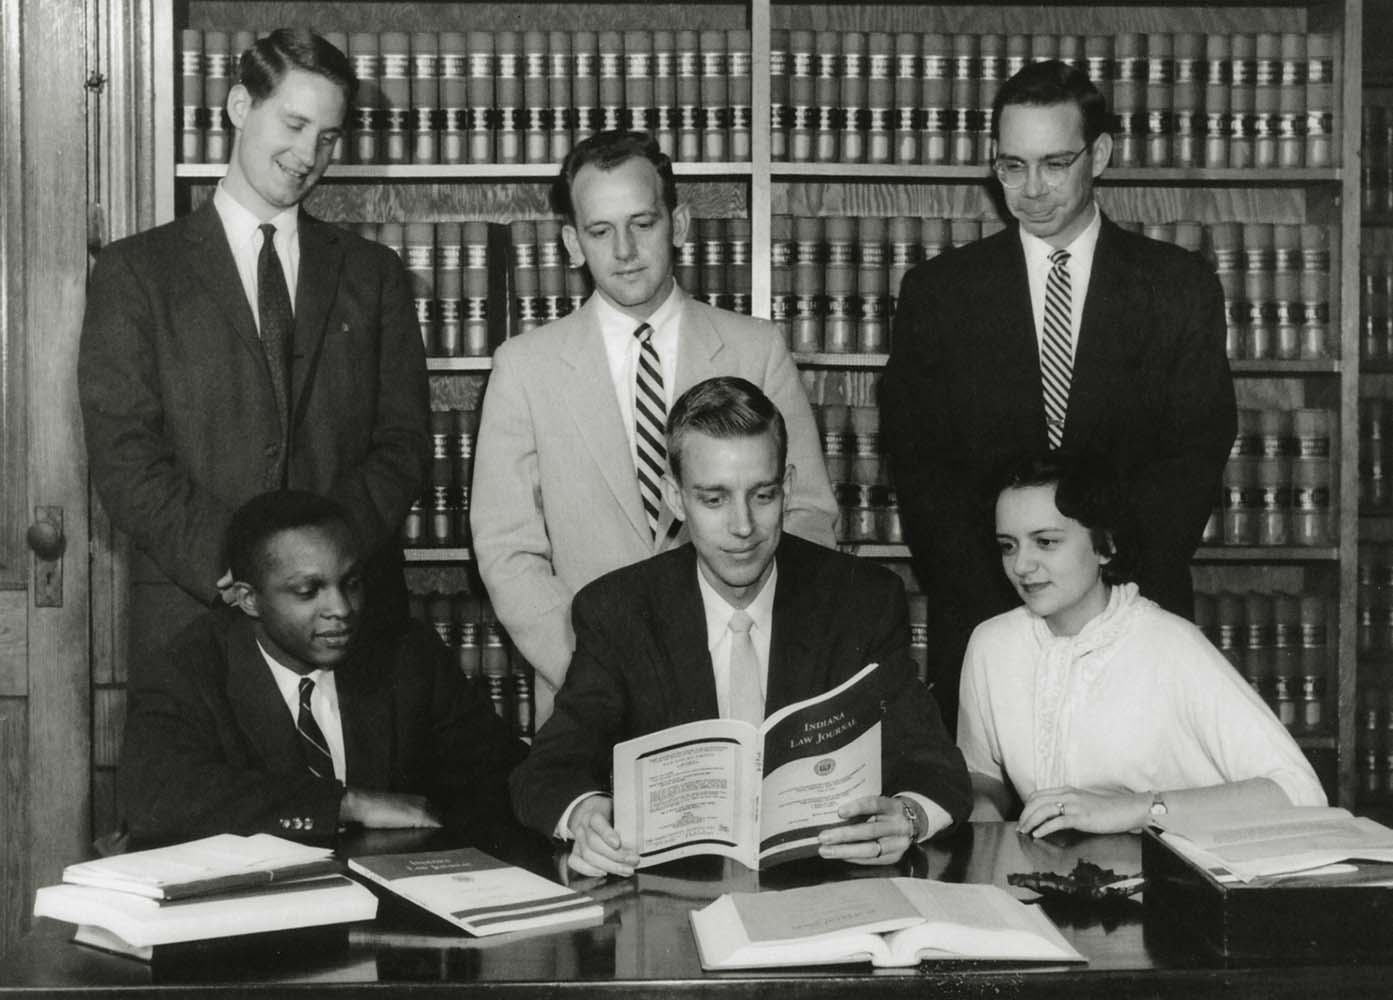 Shirley Abrahamson and the other editors of the Indiana Law Journal